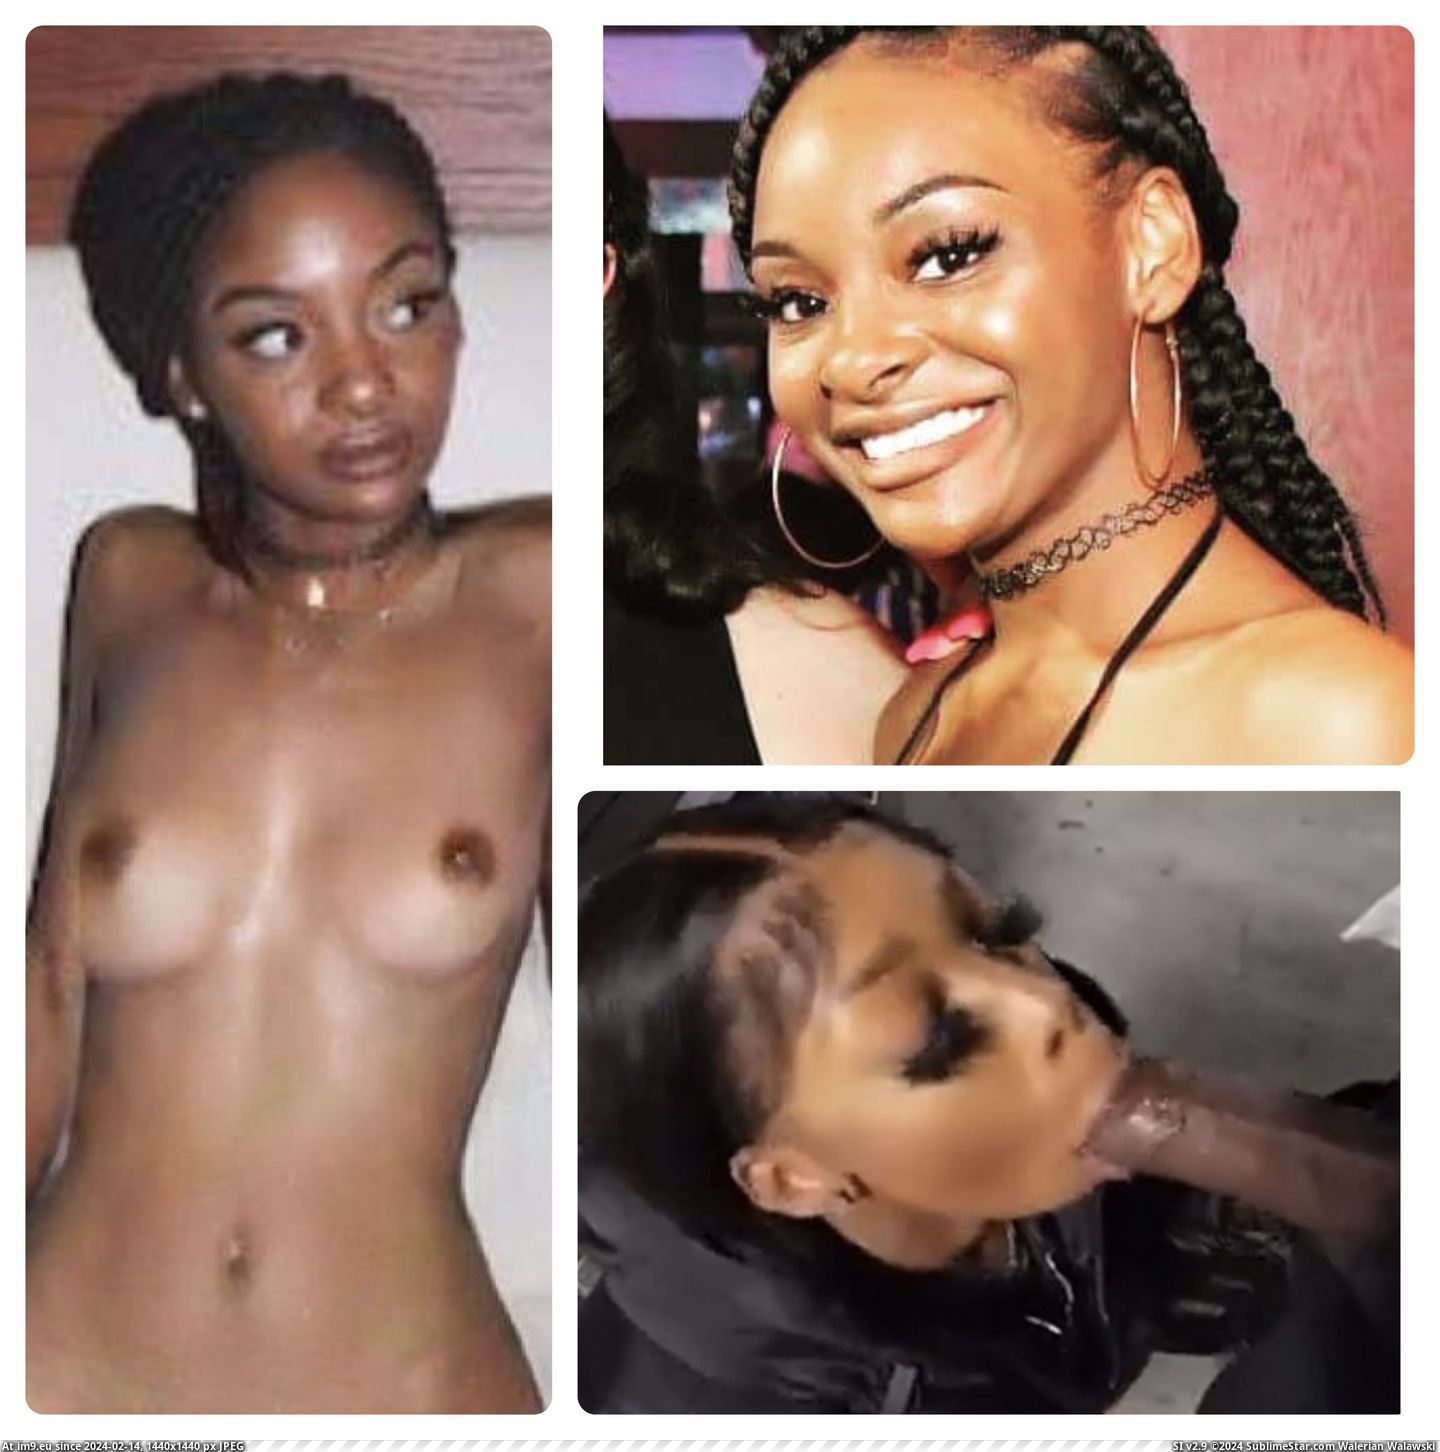 #Sex #White #Slave #Grabbed #Needing #Collages #Ebony #Aaliyah #Dallas Aaliyah White Ebony Collages - 045 Pic. (Image of album Aaliyah White, Dallas, TX Sex Slave needing to be grabbed and owned))